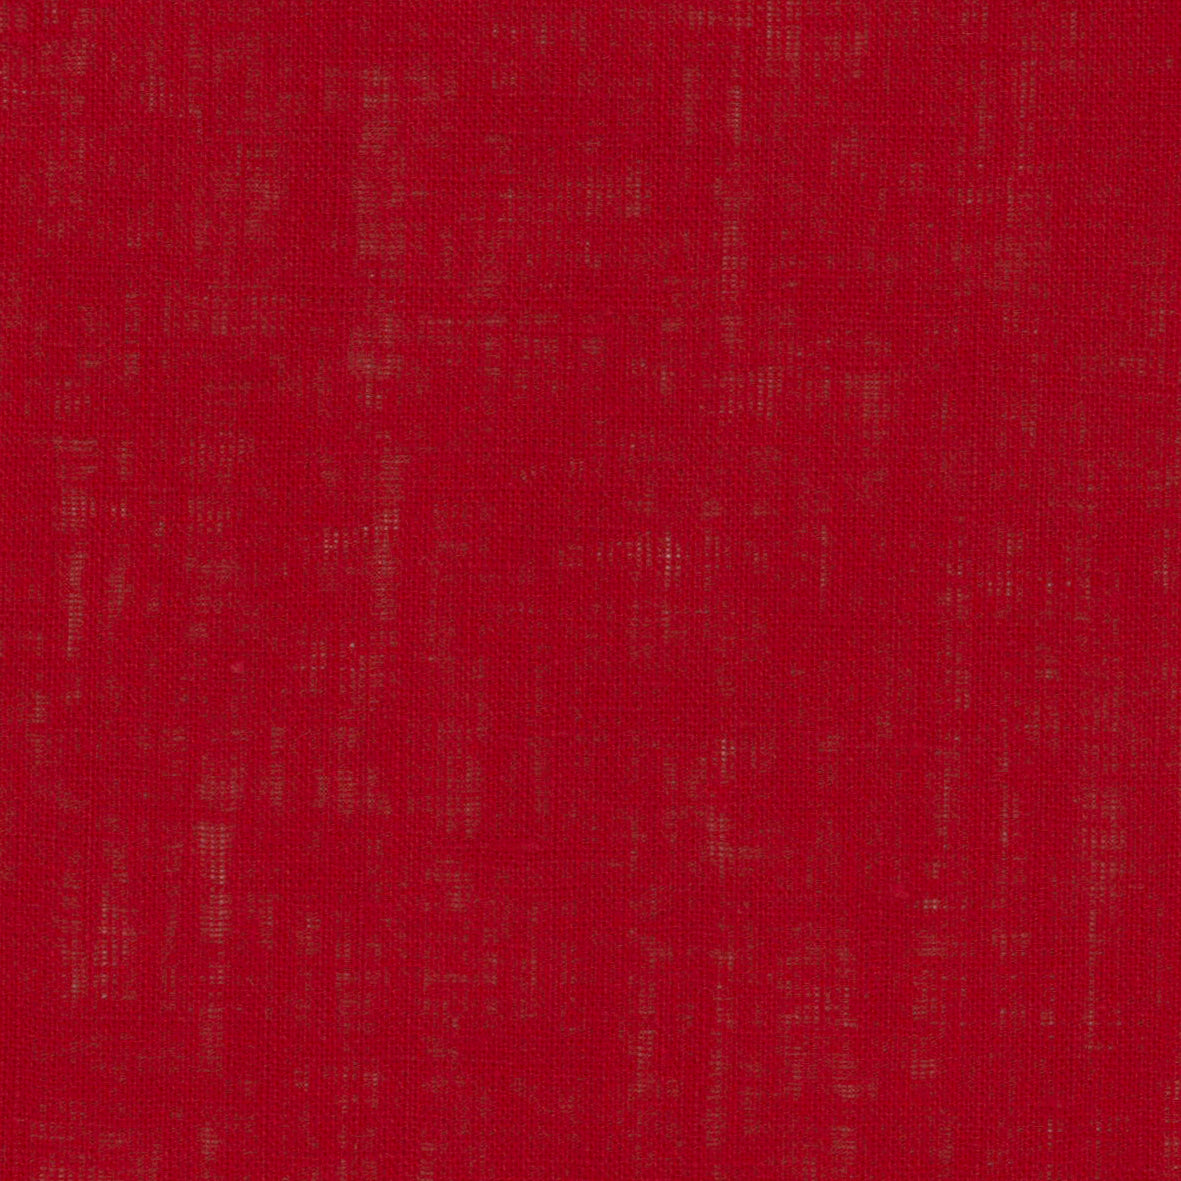 36011-04 Red Linen Plain Dyed Blend 180g.yd 53&quot; blend linen plain dyed polyester red woven Solid Color - knit fabric - woven fabric - fabric company - fabric wholesale - fabric b2b - fabric factory - high quality fabric - hong kong fabric - fabric hk - acetate fabric - cotton fabric - linen fabric - metallic fabric - nylon fabric - polyester fabric - spandex fabric - chun wing hing - cwh hk - fabric worldwide ship - 針織布 - 梳織布 - 布料公司- 布料批發 - 香港布料 - 秦榮興